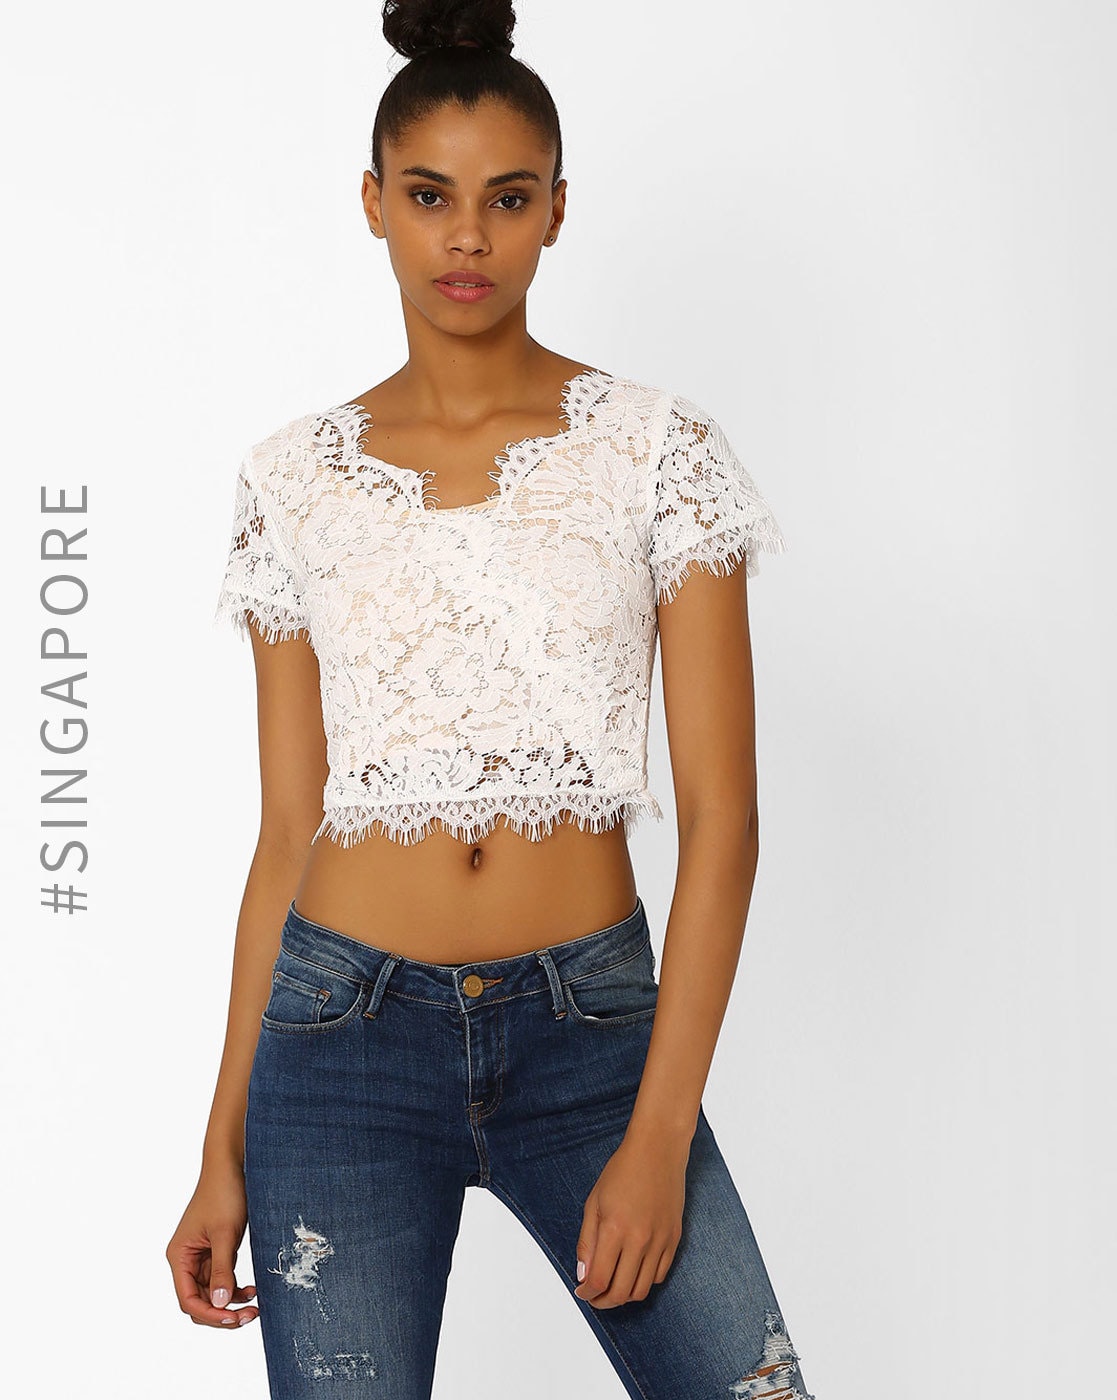 Lace White Crop Top - Buy Lace White Crop Top online in India